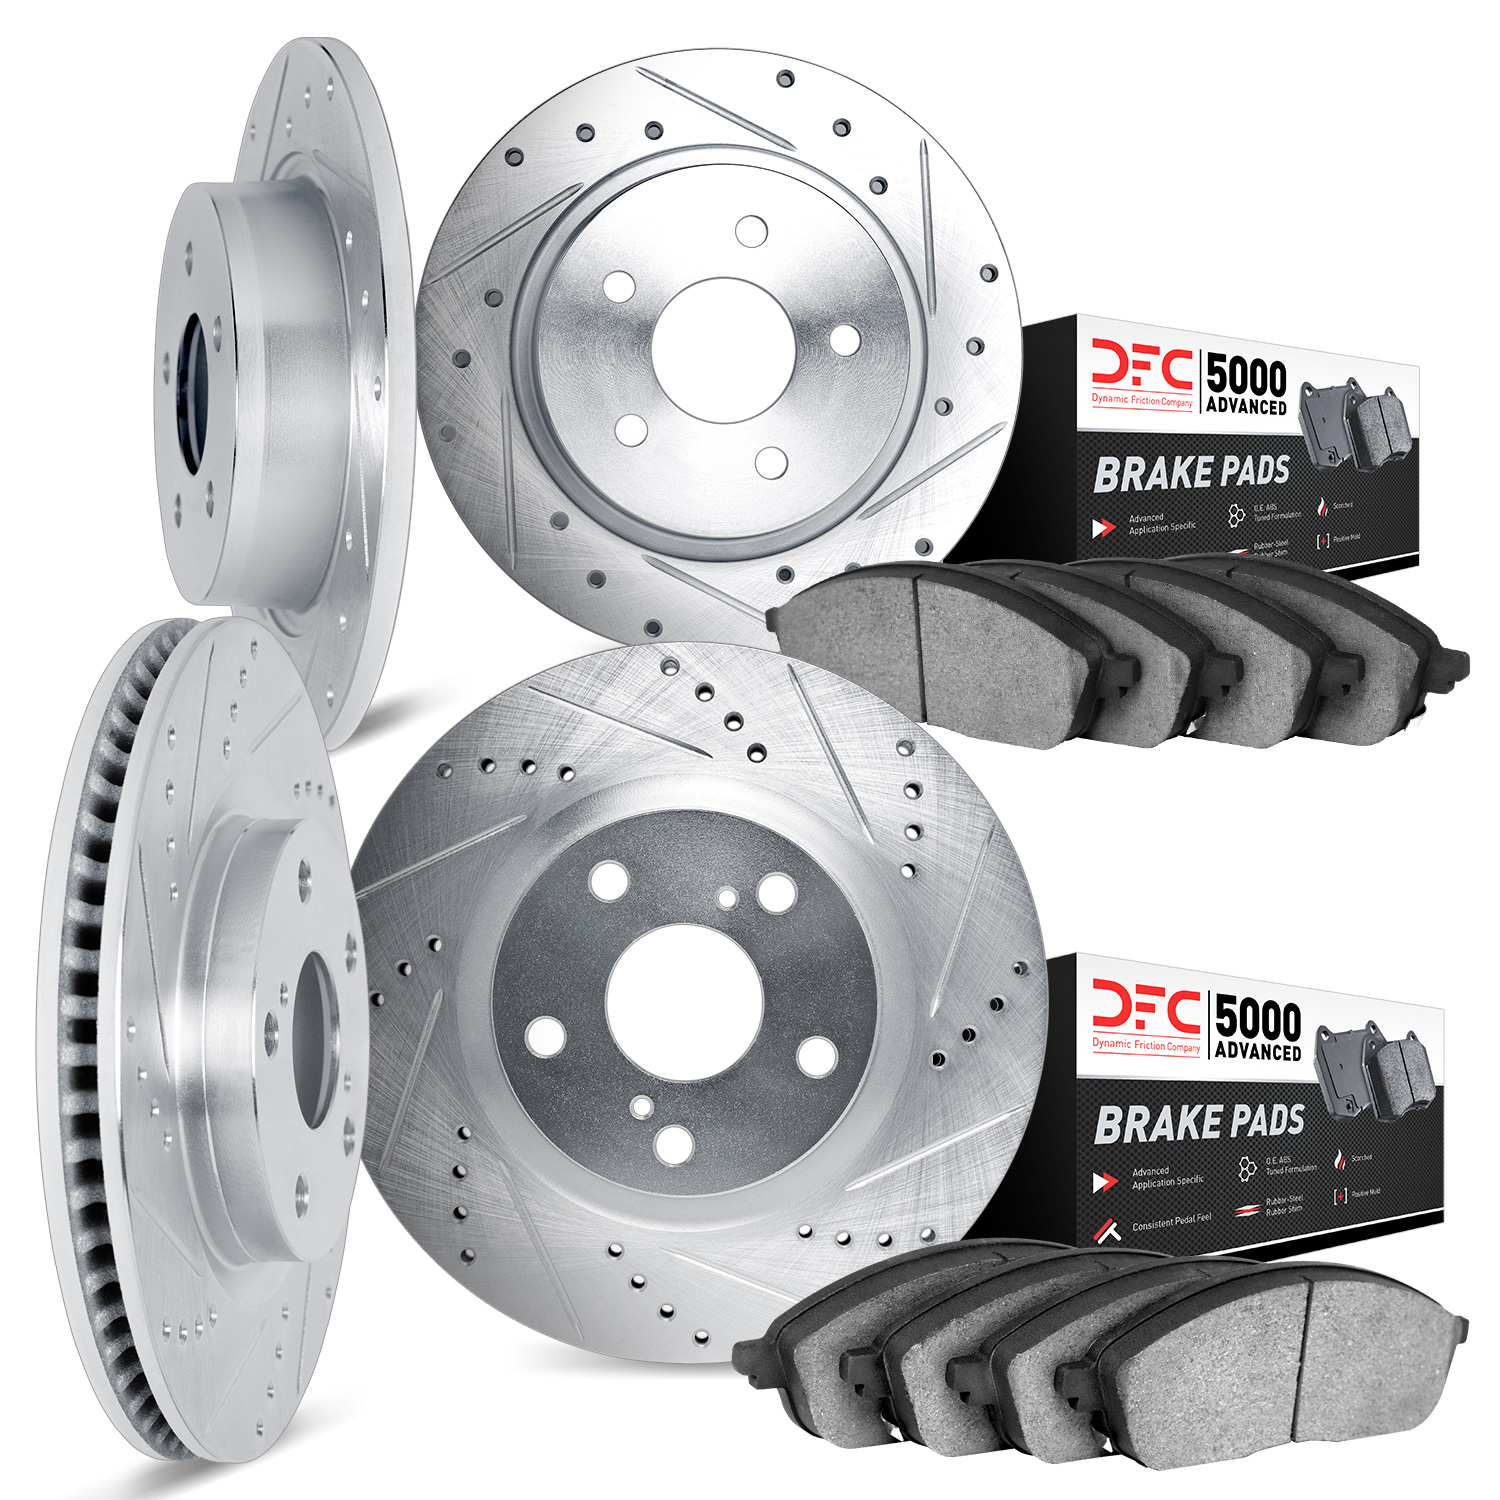 7504-54341 Drilled/Slotted Brake Rotors w/5000 Advanced Brake Pads Kit [Silver], 1999-2004 Ford/Lincoln/Mercury/Mazda, Position: